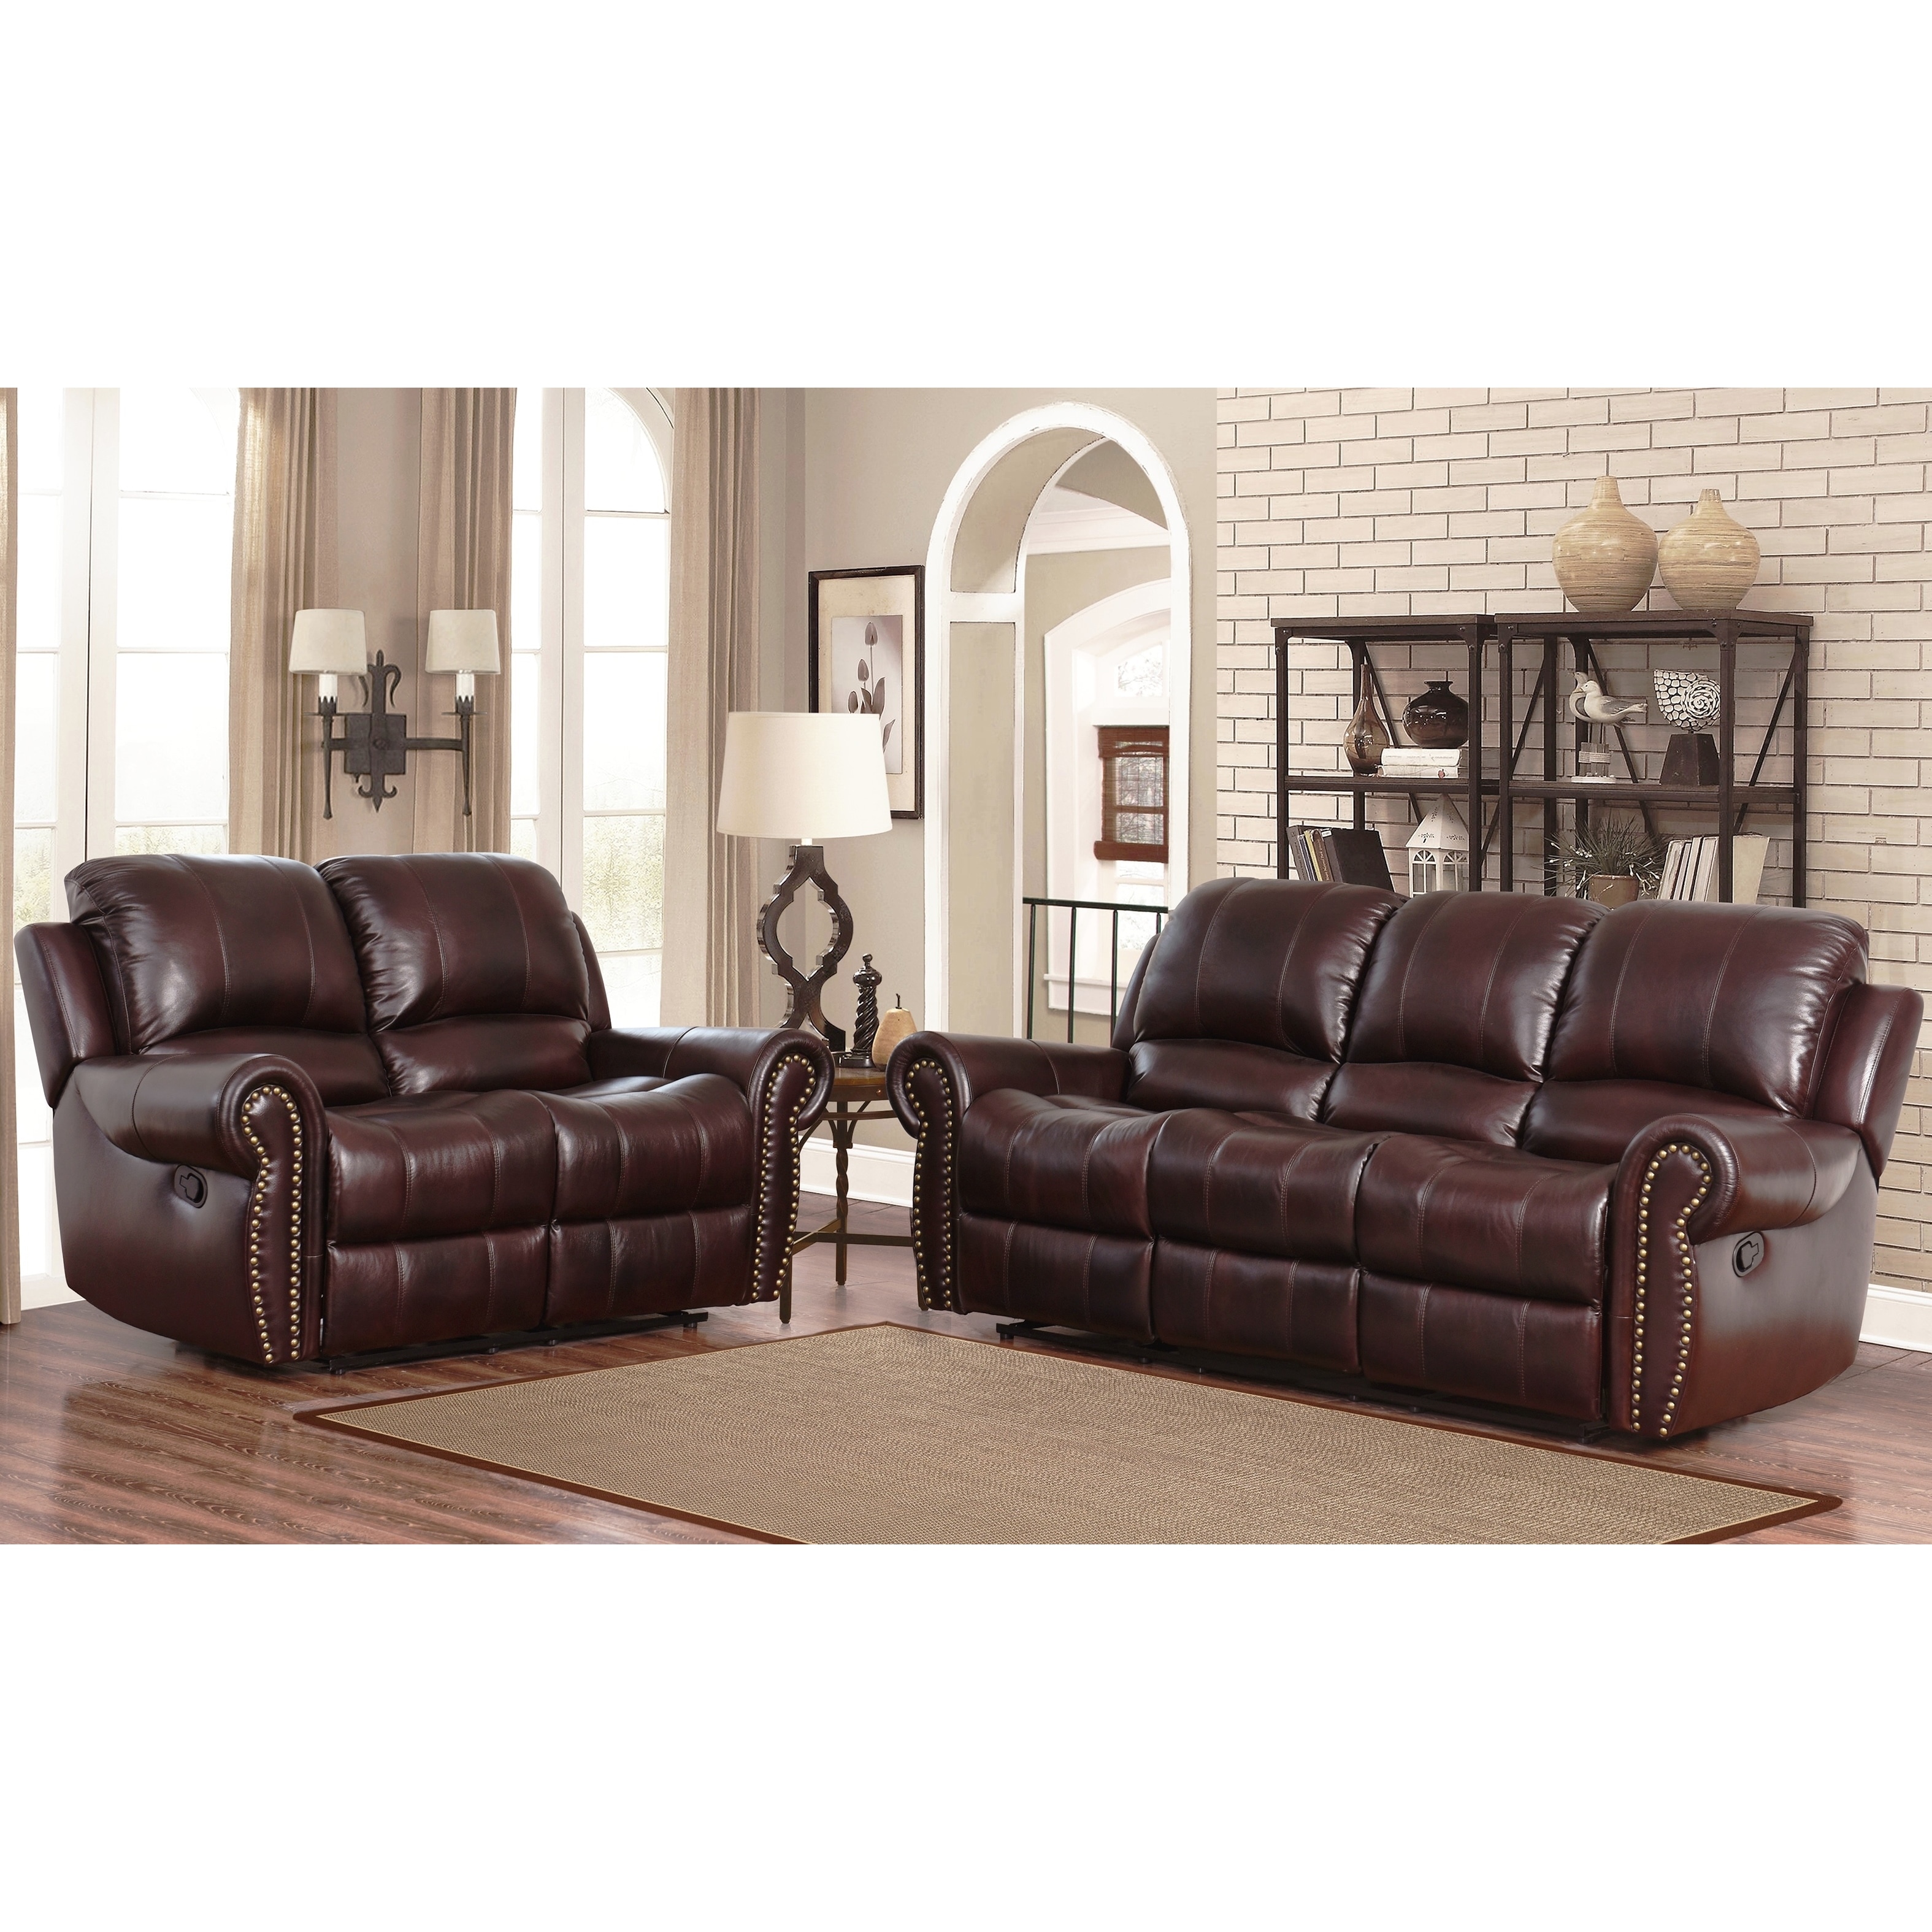 Abbyson Living Broadway Premium Top grain Leather Reclining Sofa And Loveseat